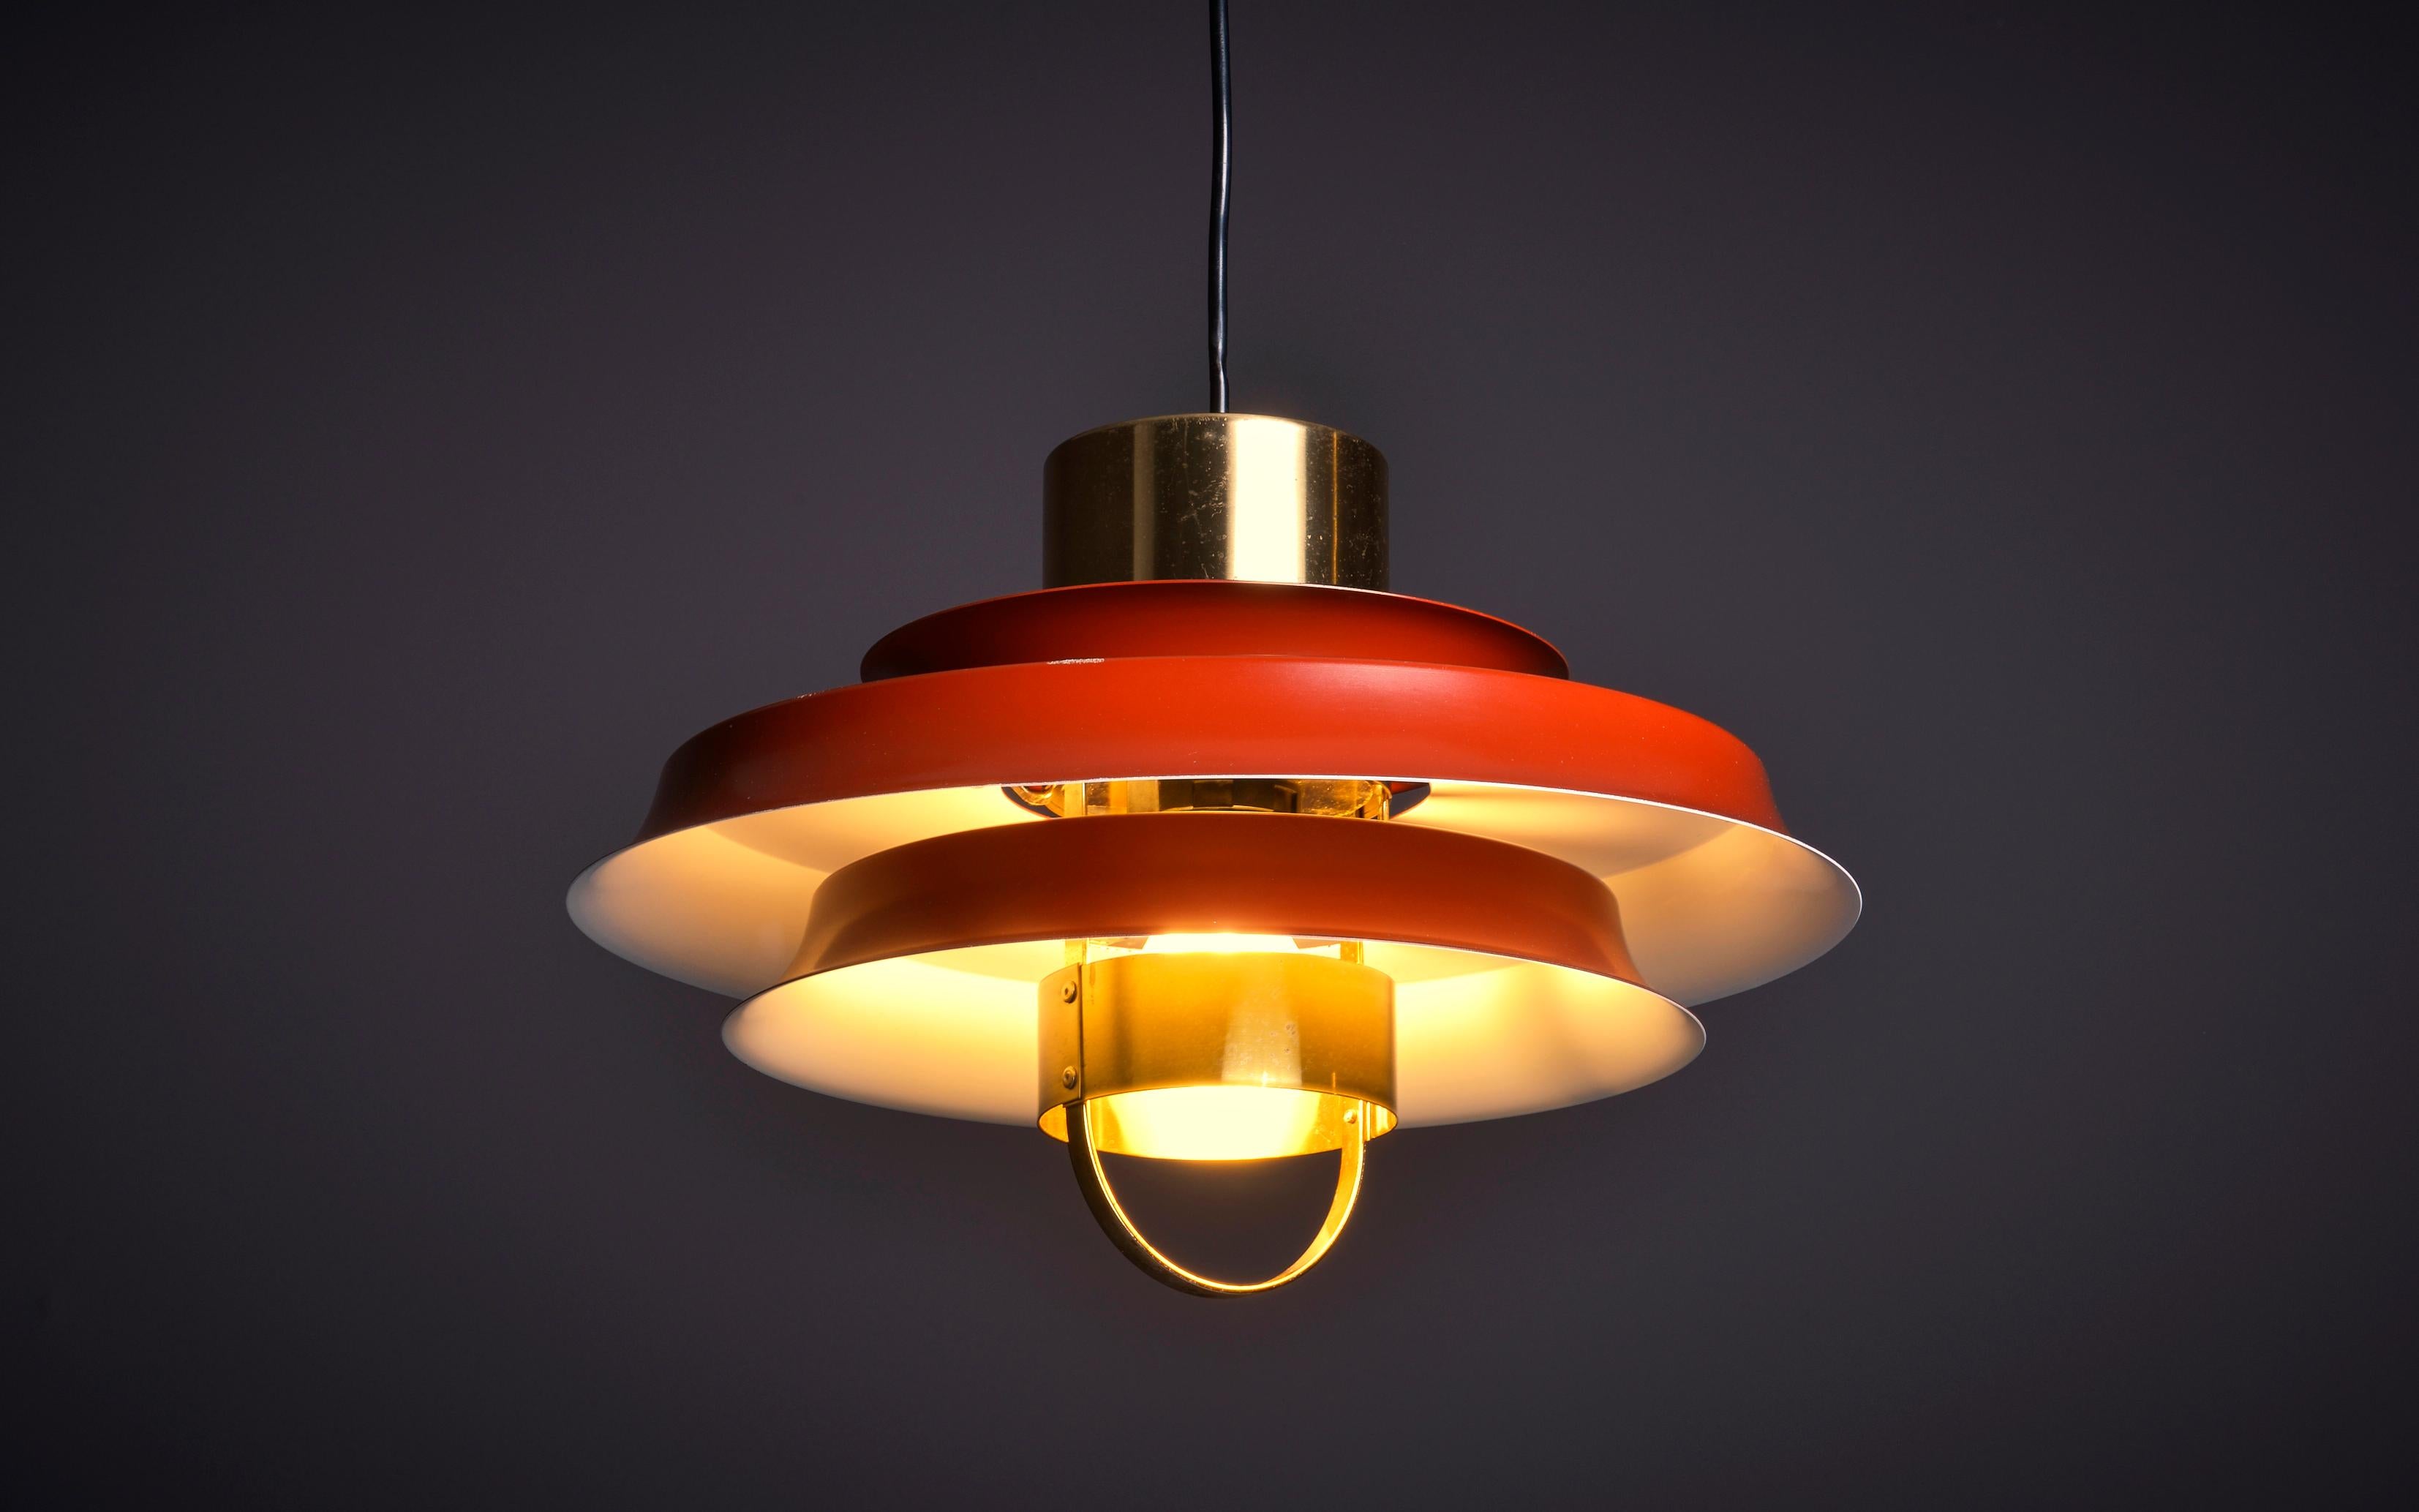 Pendant lamp in brown / red lacquered aluminum and brass elements by Danish manufacturer Vitrika , 1970s. Socket: 1 x E27.

Danish lighting manufacturer Vitrika was founded in the 1940s with a focus on three main elements being retail, design and